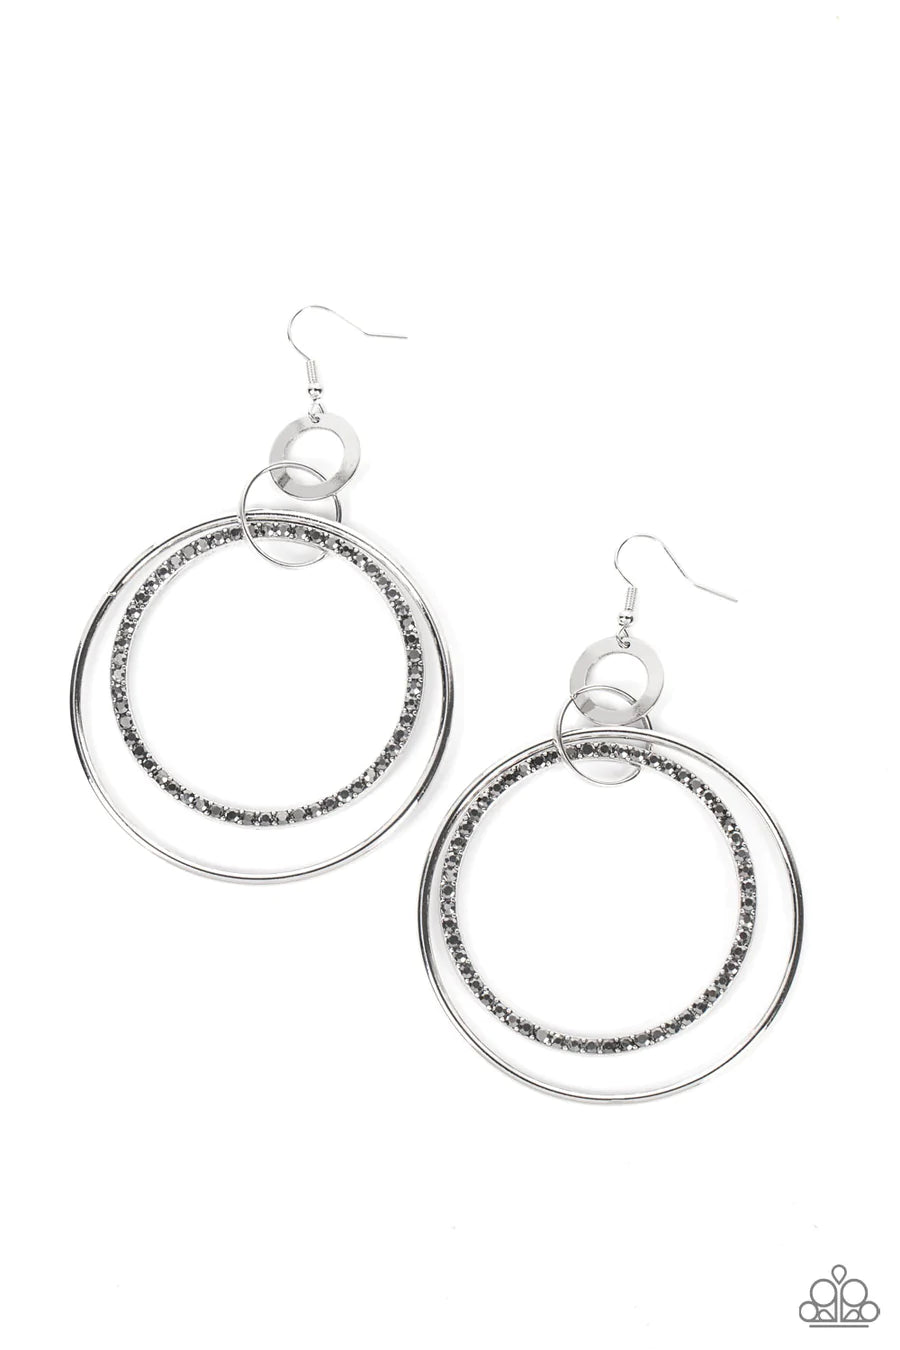 HAUTE HYSTERIA - SILVER HEMATITE RHINESTONE CIRCLE EARRINGS - PAPARAZZI SUMMER PARTY PACK 2022 EXCLUSIVE